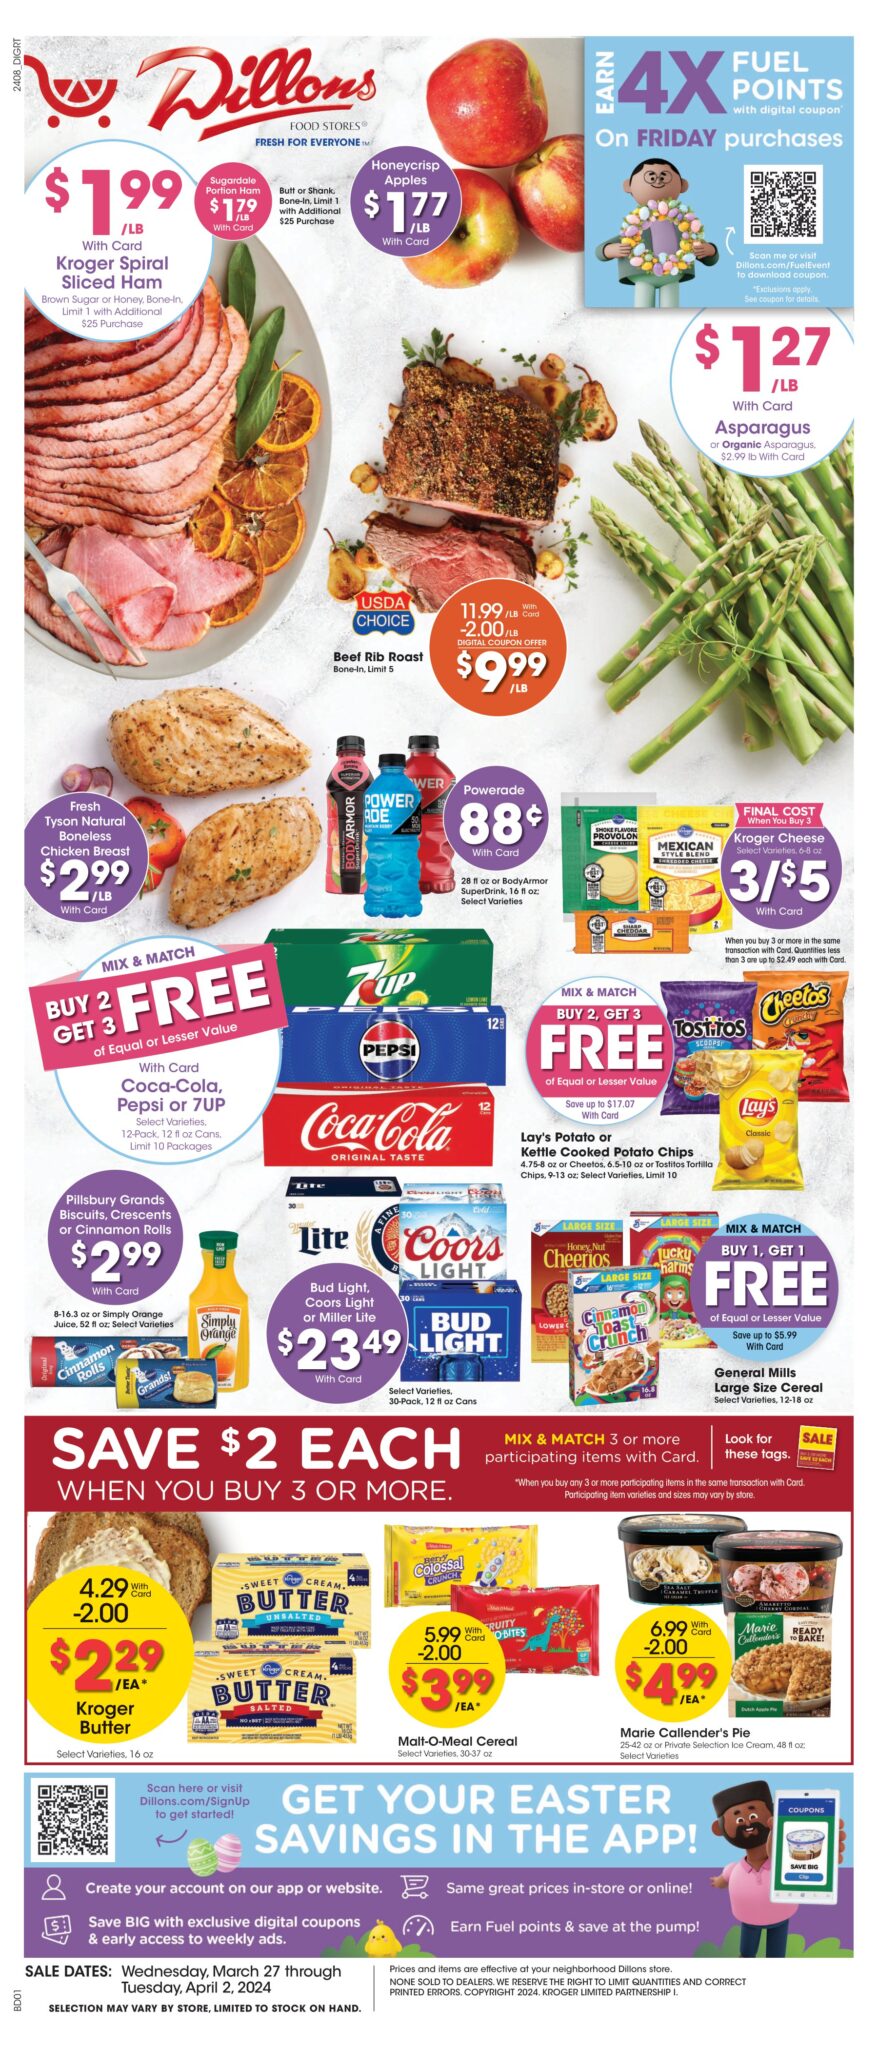 Dillons Weekly Specials